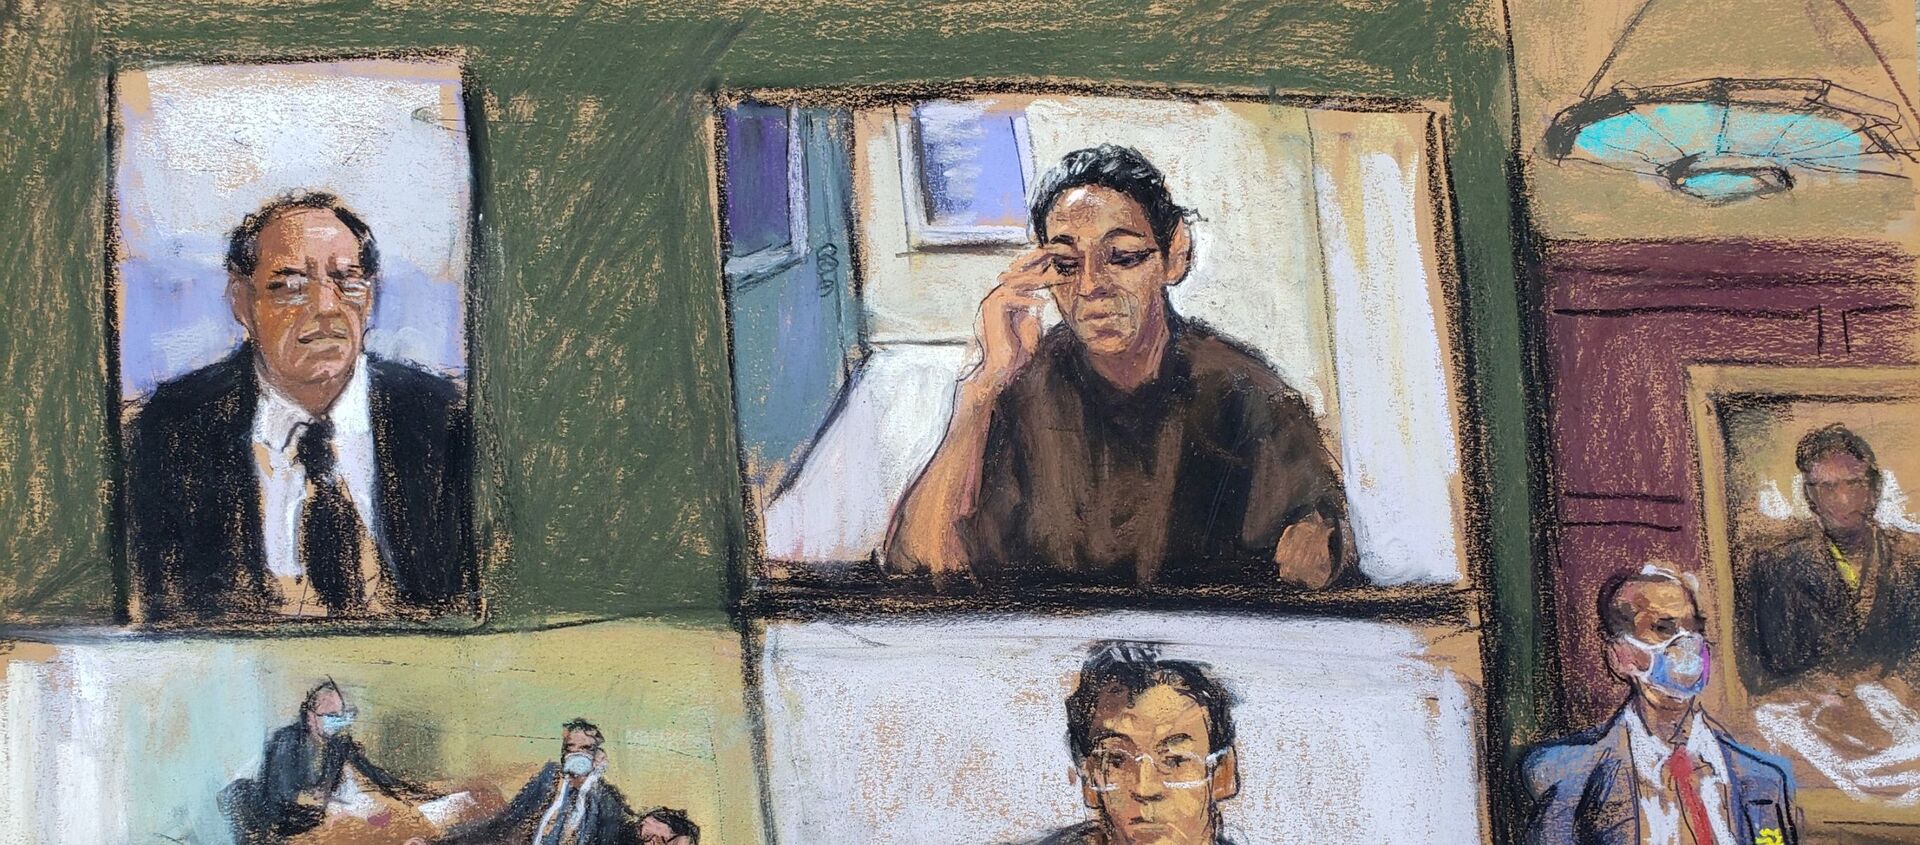 Ghislaine Maxwell appears via video link during her arraignment hearing where she was denied bail for her role aiding Jeffrey Epstein to recruit and eventually abuse of minor girls, in Manhattan Federal Court, in the Manhattan borough of New York City, New York, U.S. July 14, 2020 in this courtroom sketch - Sputnik International, 1920, 30.03.2021